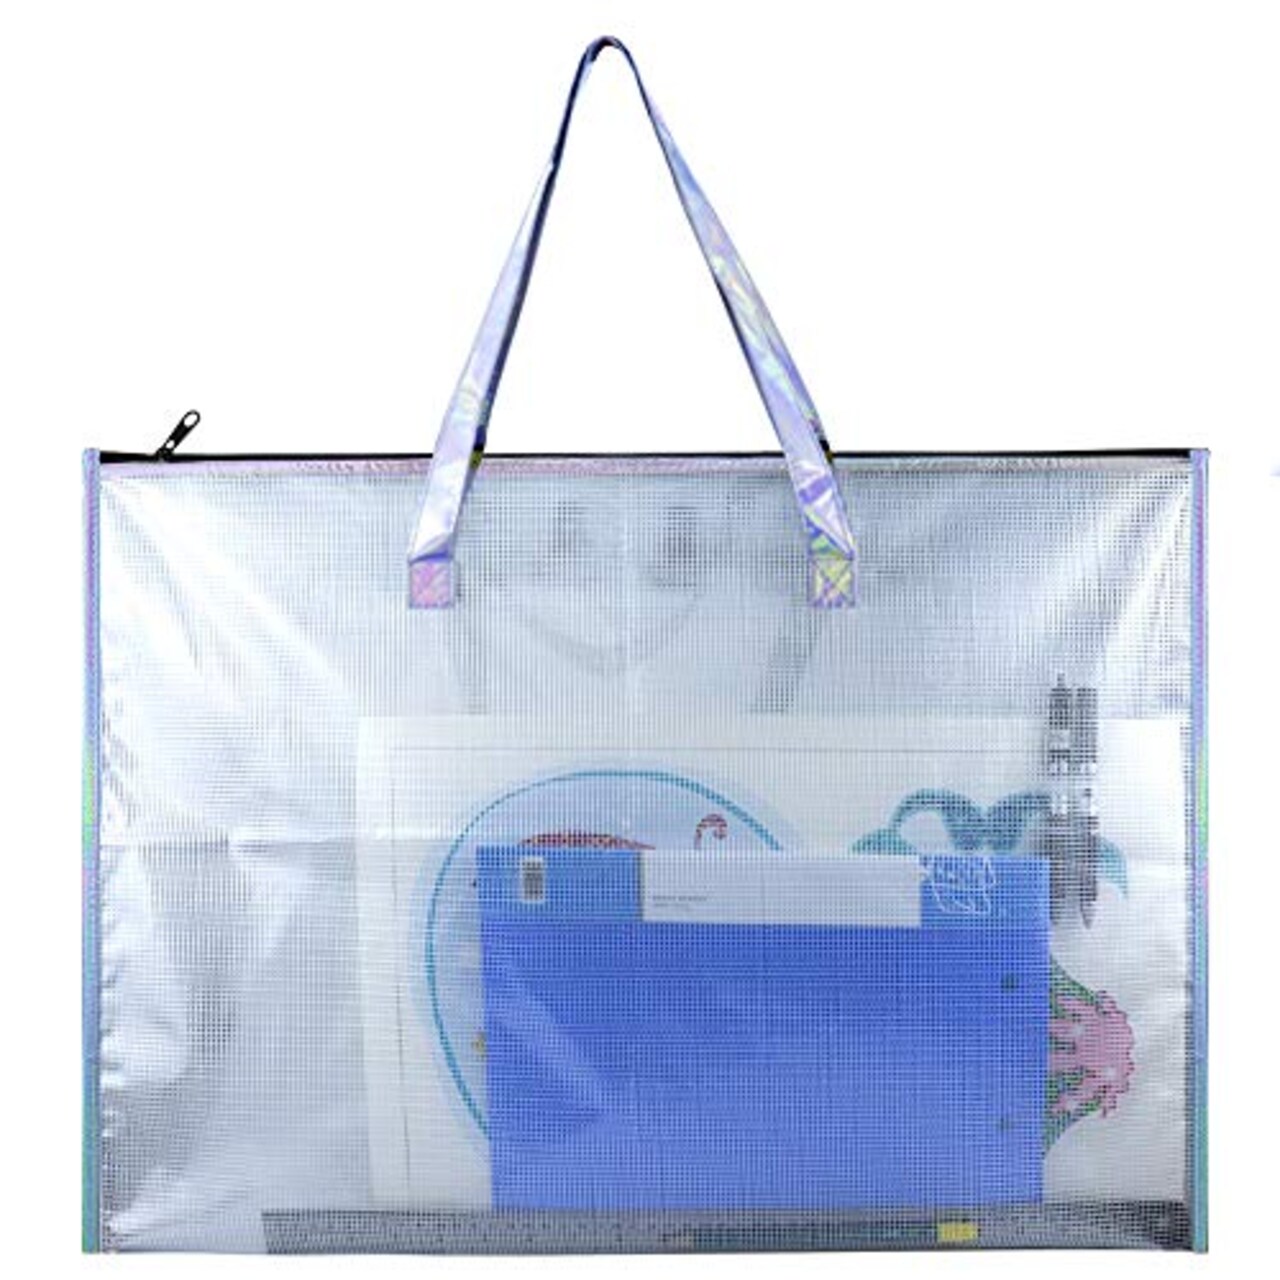 BUSOHA Large Clear Mesh Vinyl Bag with Handle and Zipper/Waterproof Art Storage  Bag for Artworks, Charts and Teaching Material Multipurpose -19 x 25 Inch